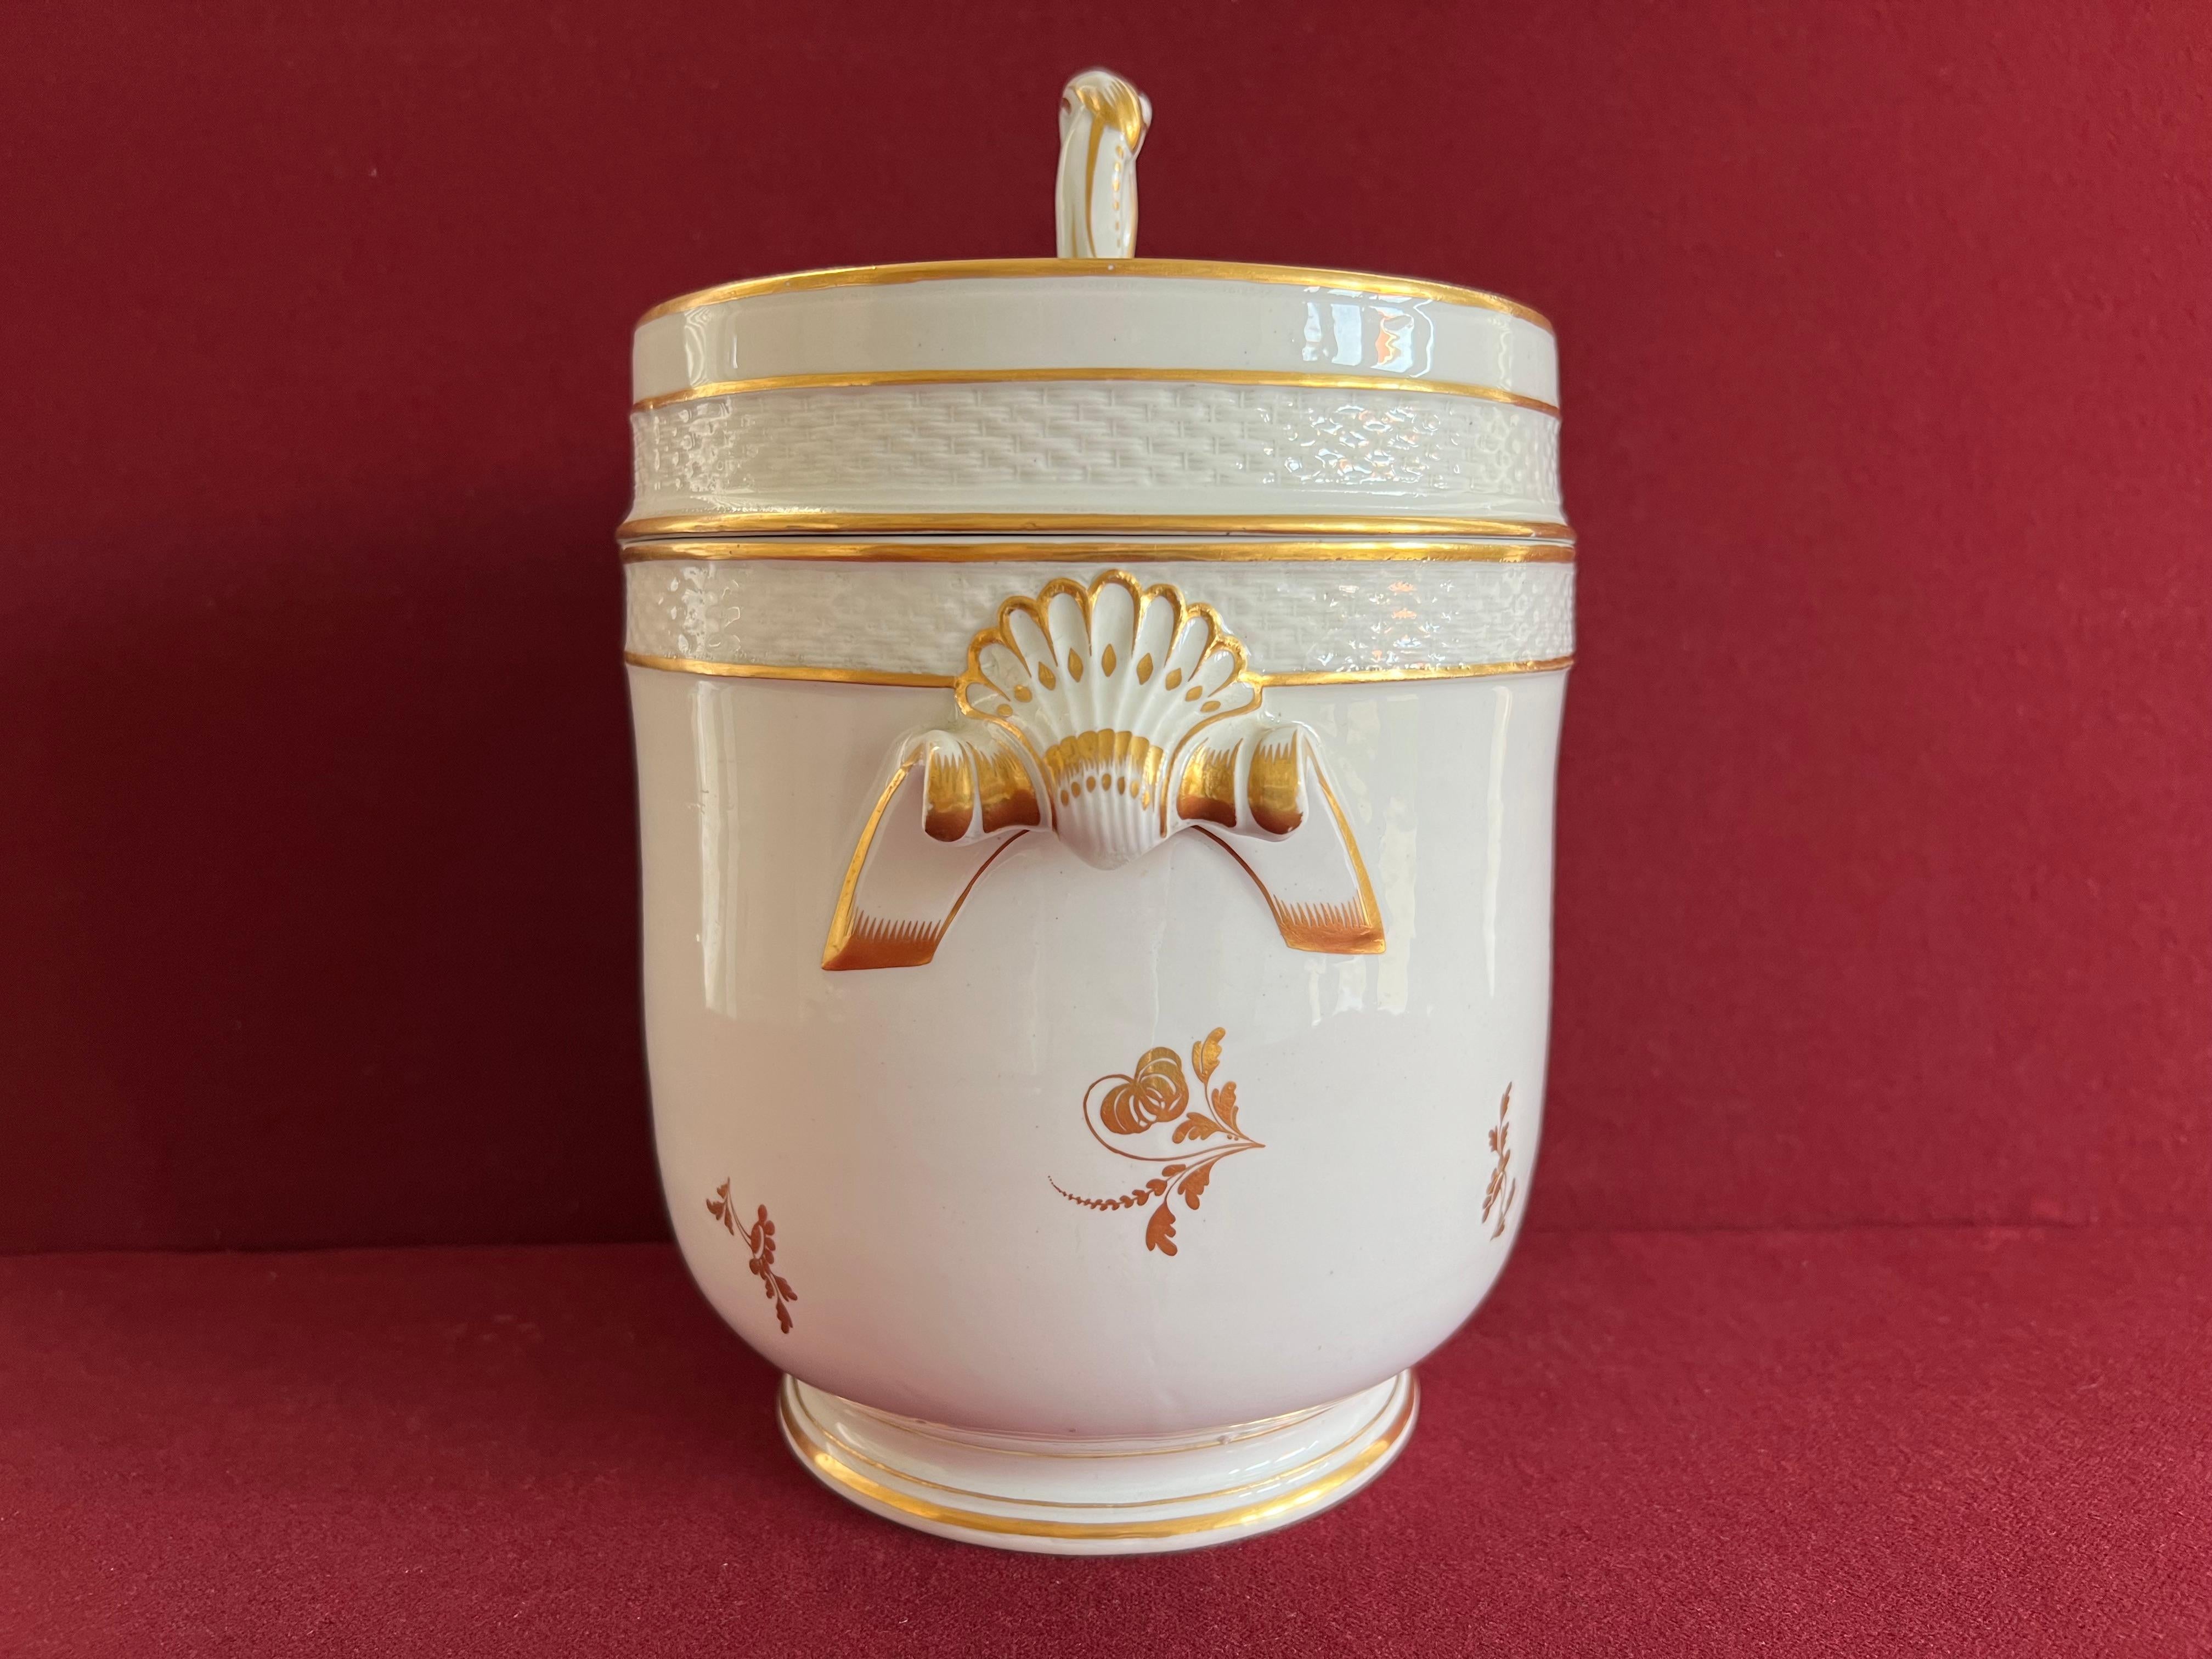 British A fine Derby Porcelain Ice Pail and Cover c.1790